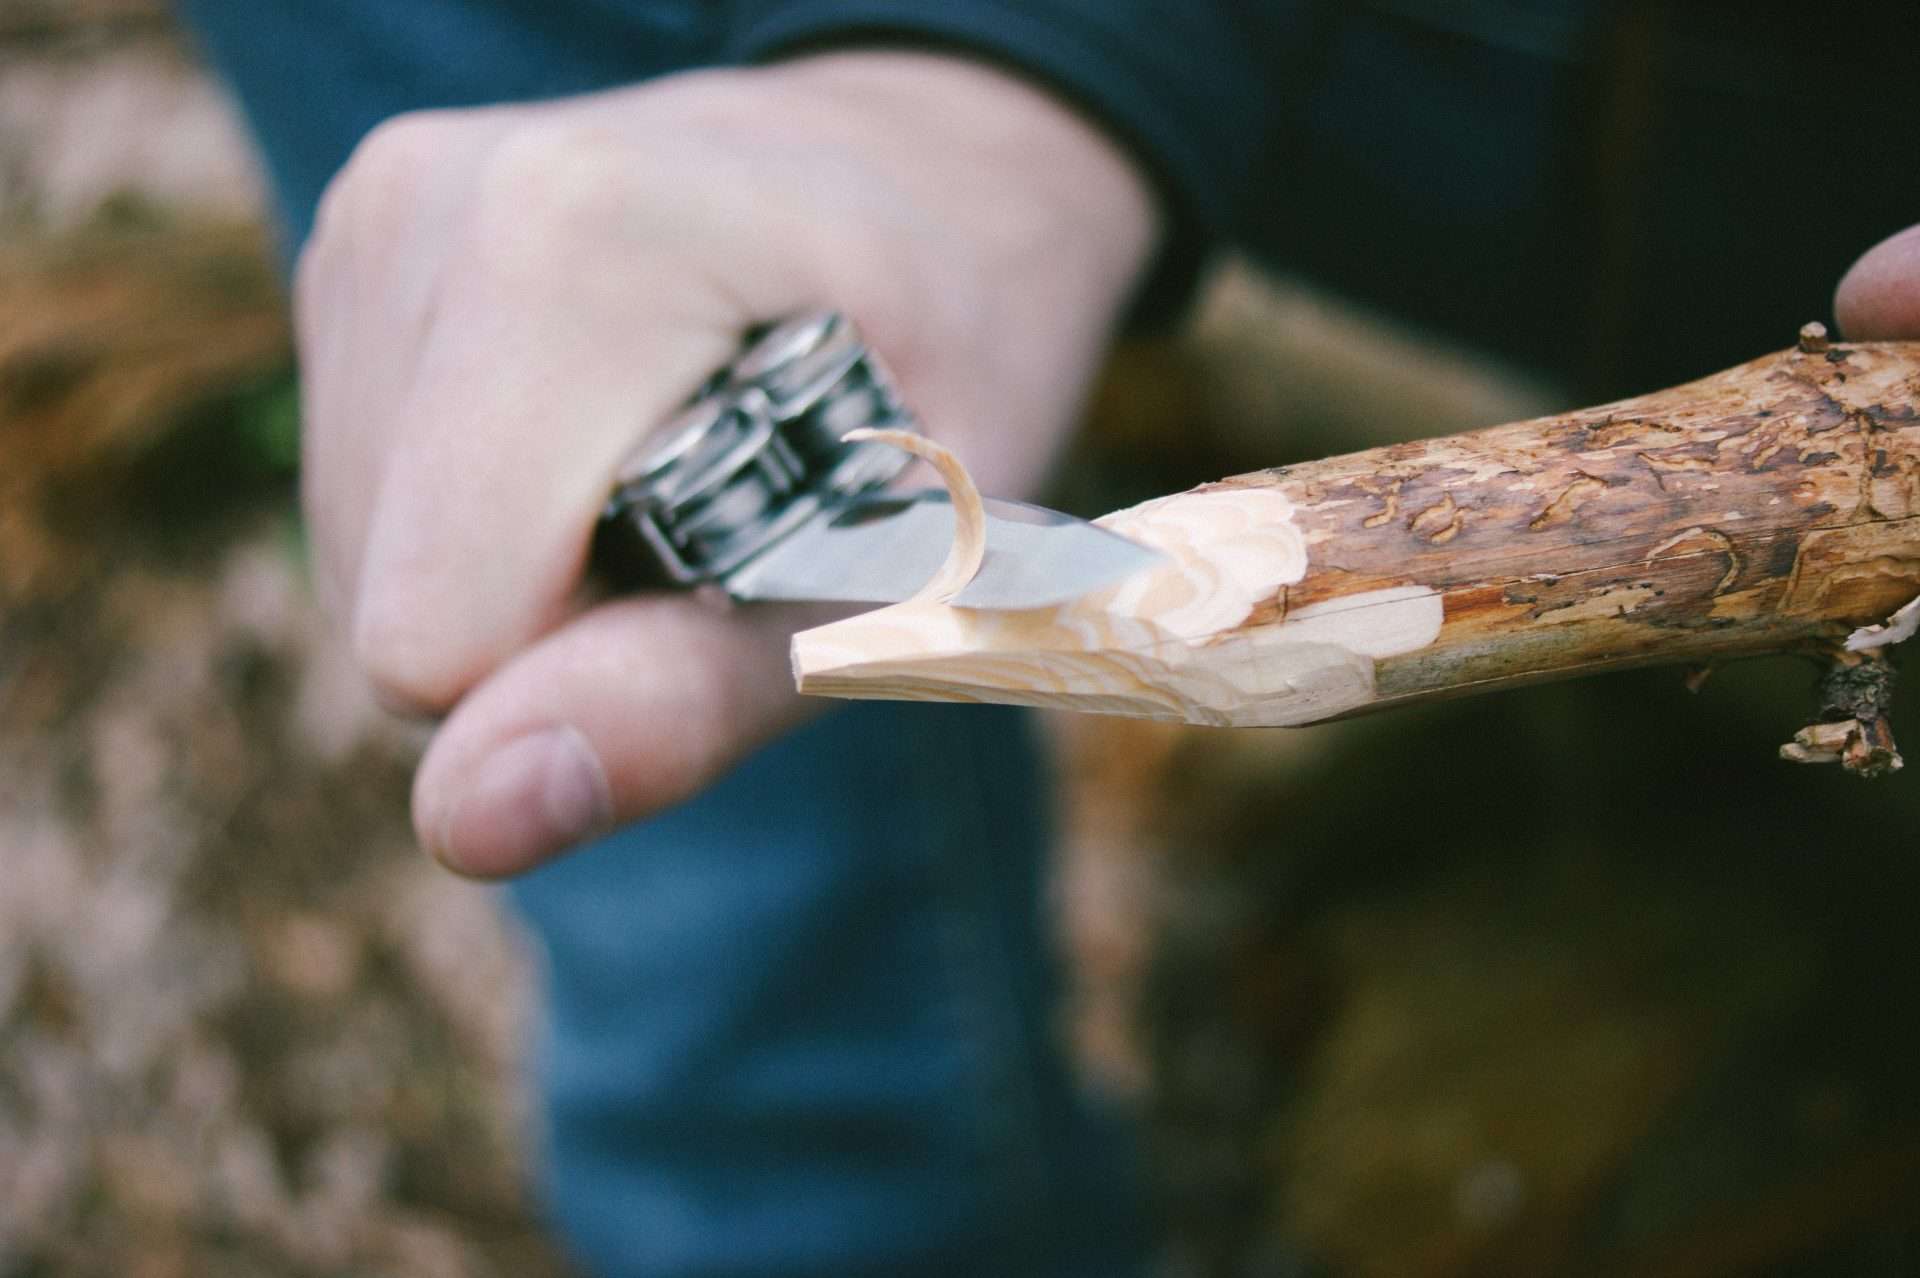 Man whittling arrow with a survival knife